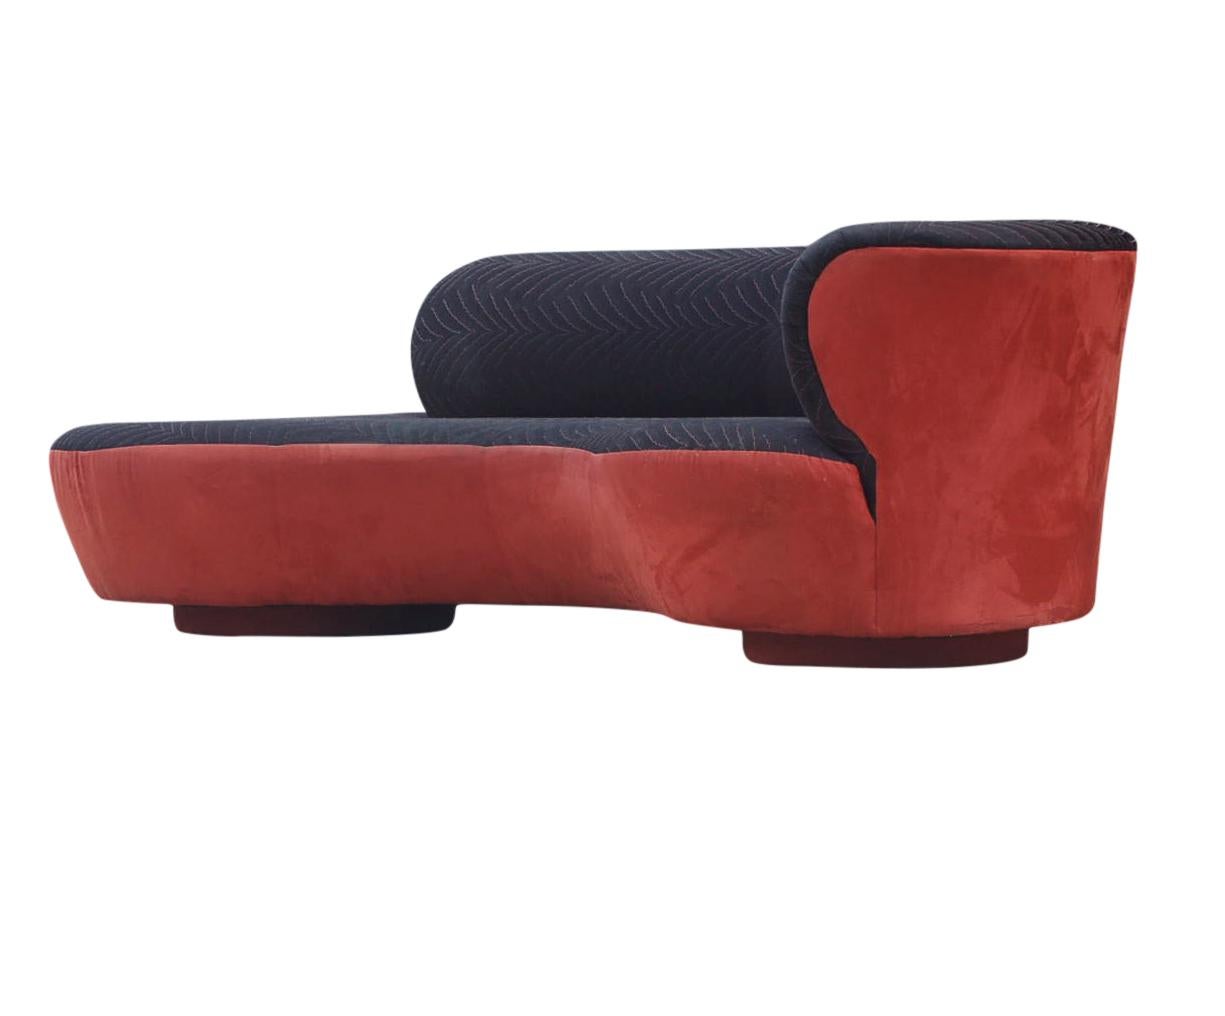 Mid-Century Modern Curved Serpentine Cloud Sofa by Weiman In Good Condition For Sale In Philadelphia, PA